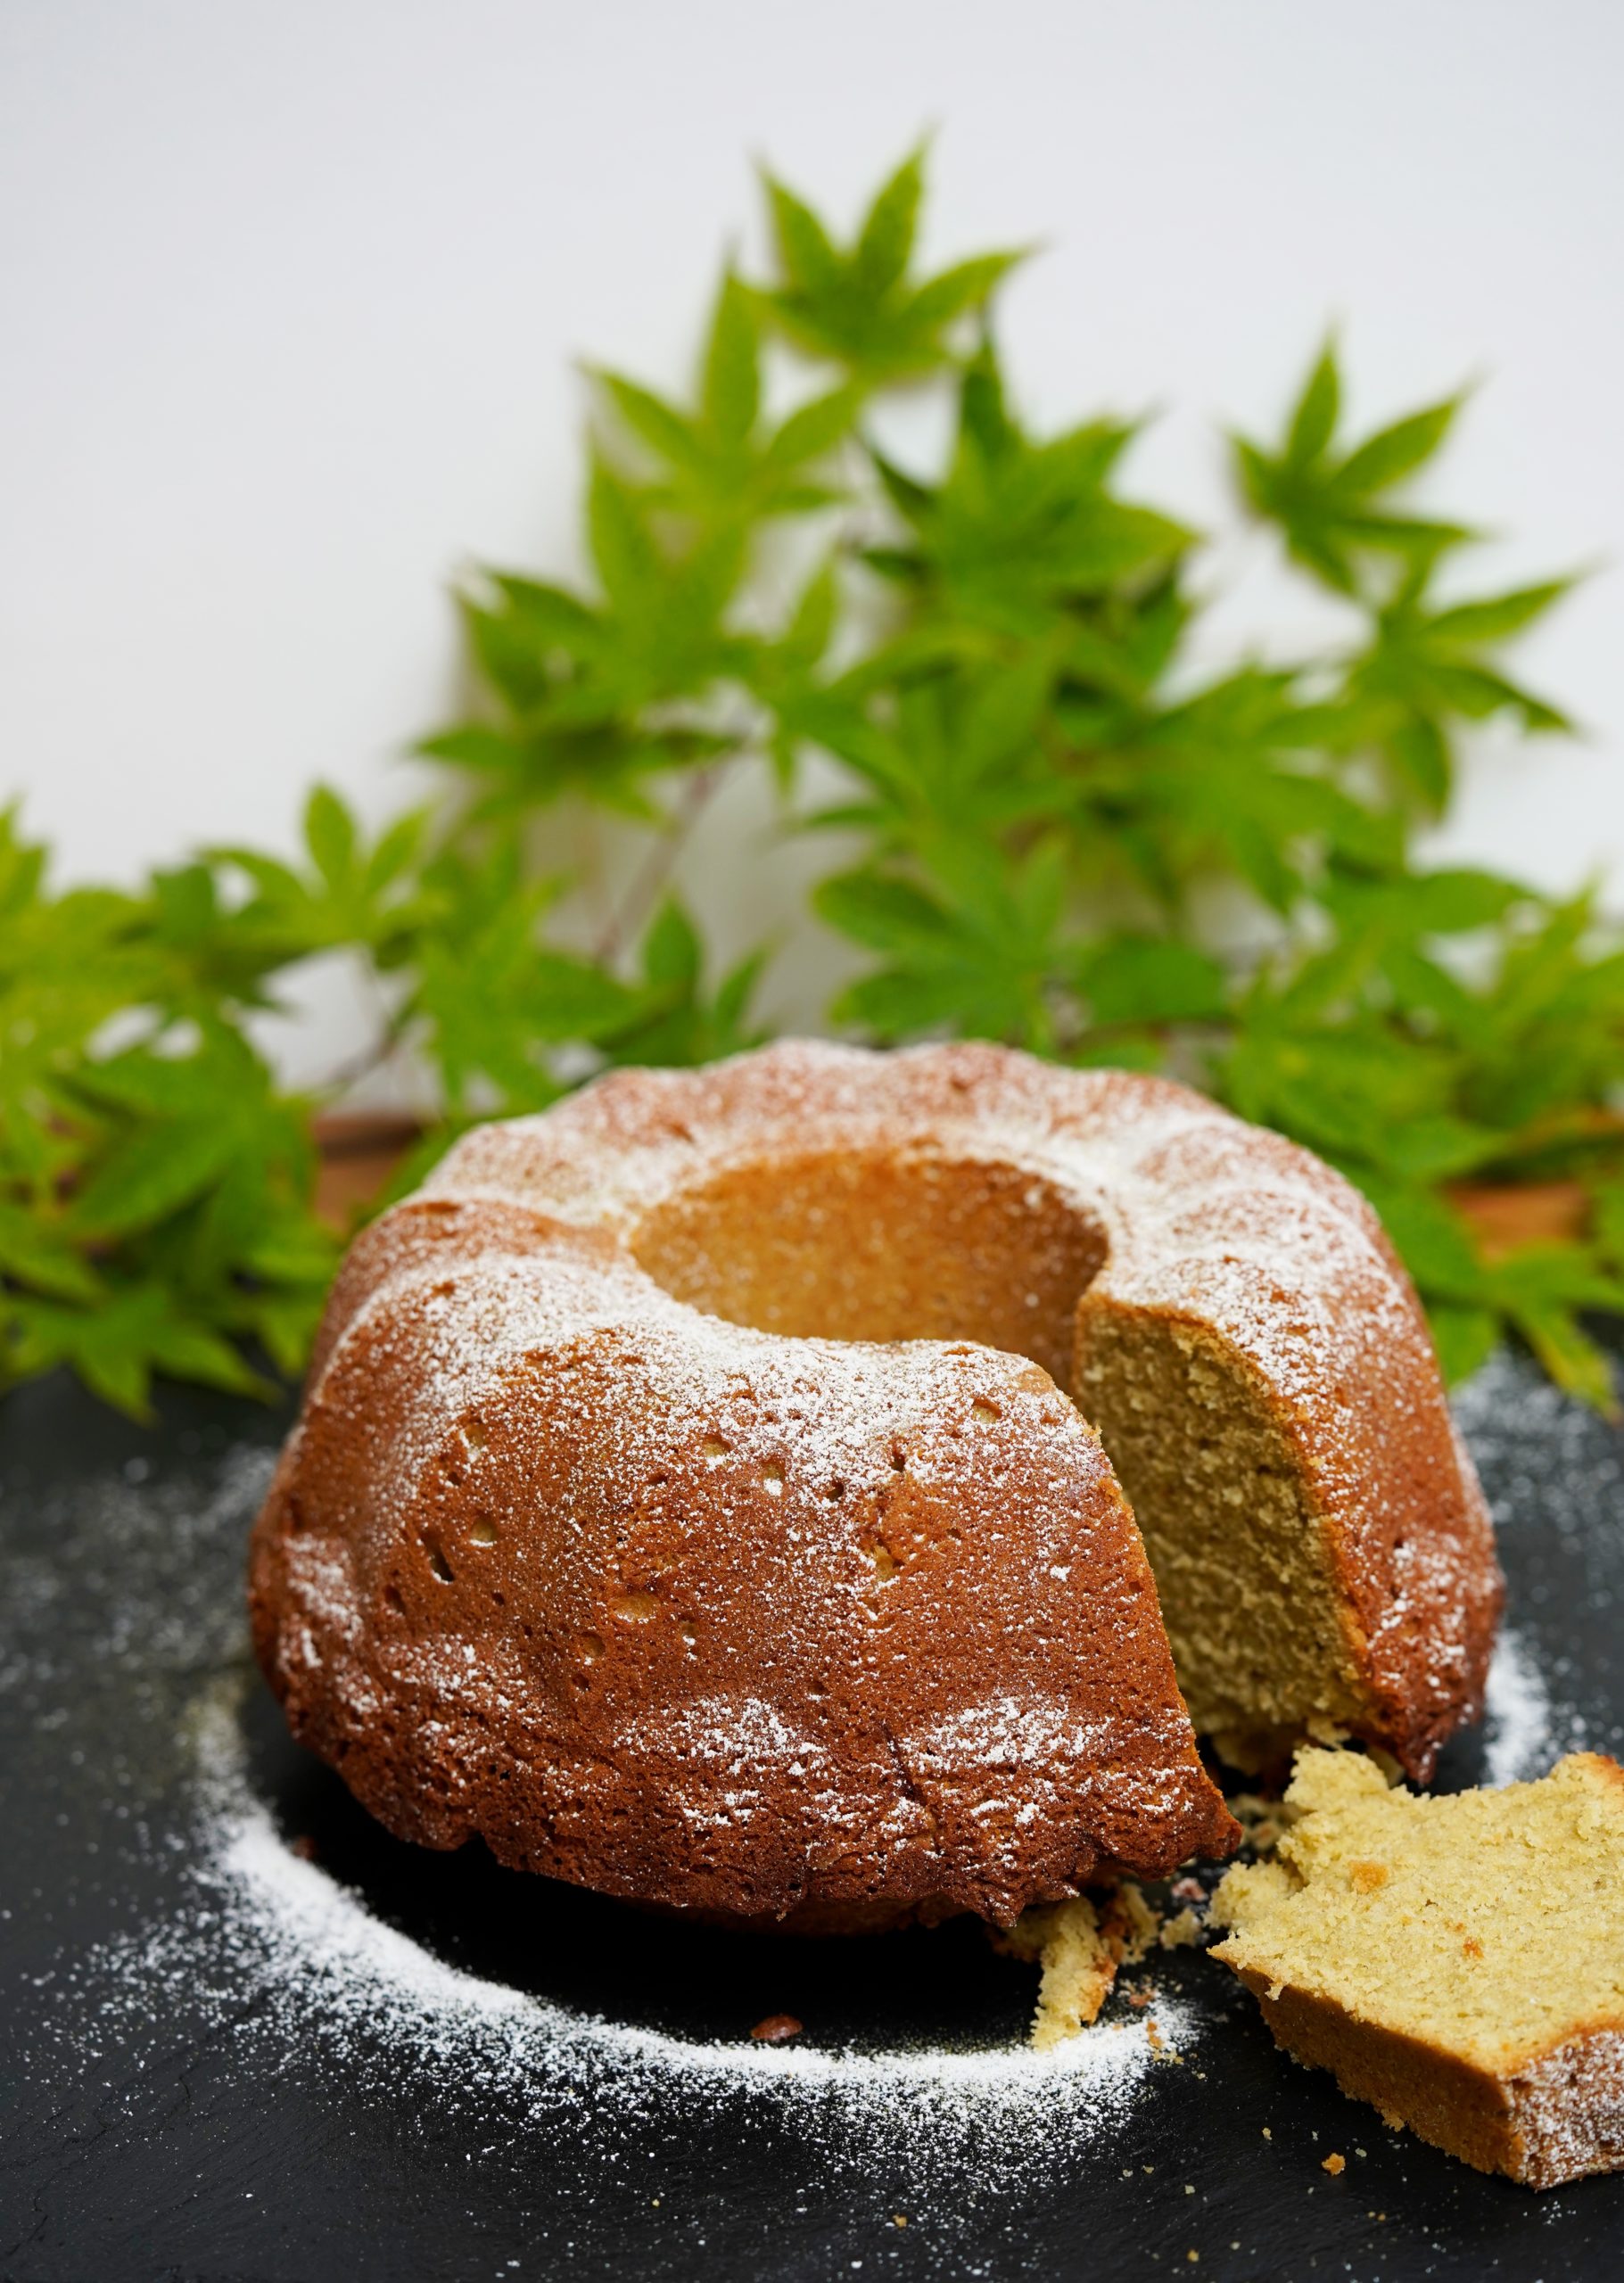 close-up-of-a-bundt-cake-piece-cut-out-green-hobbies-no-people-life-style-at-home-homemade-vertical_t20_ynmX1p